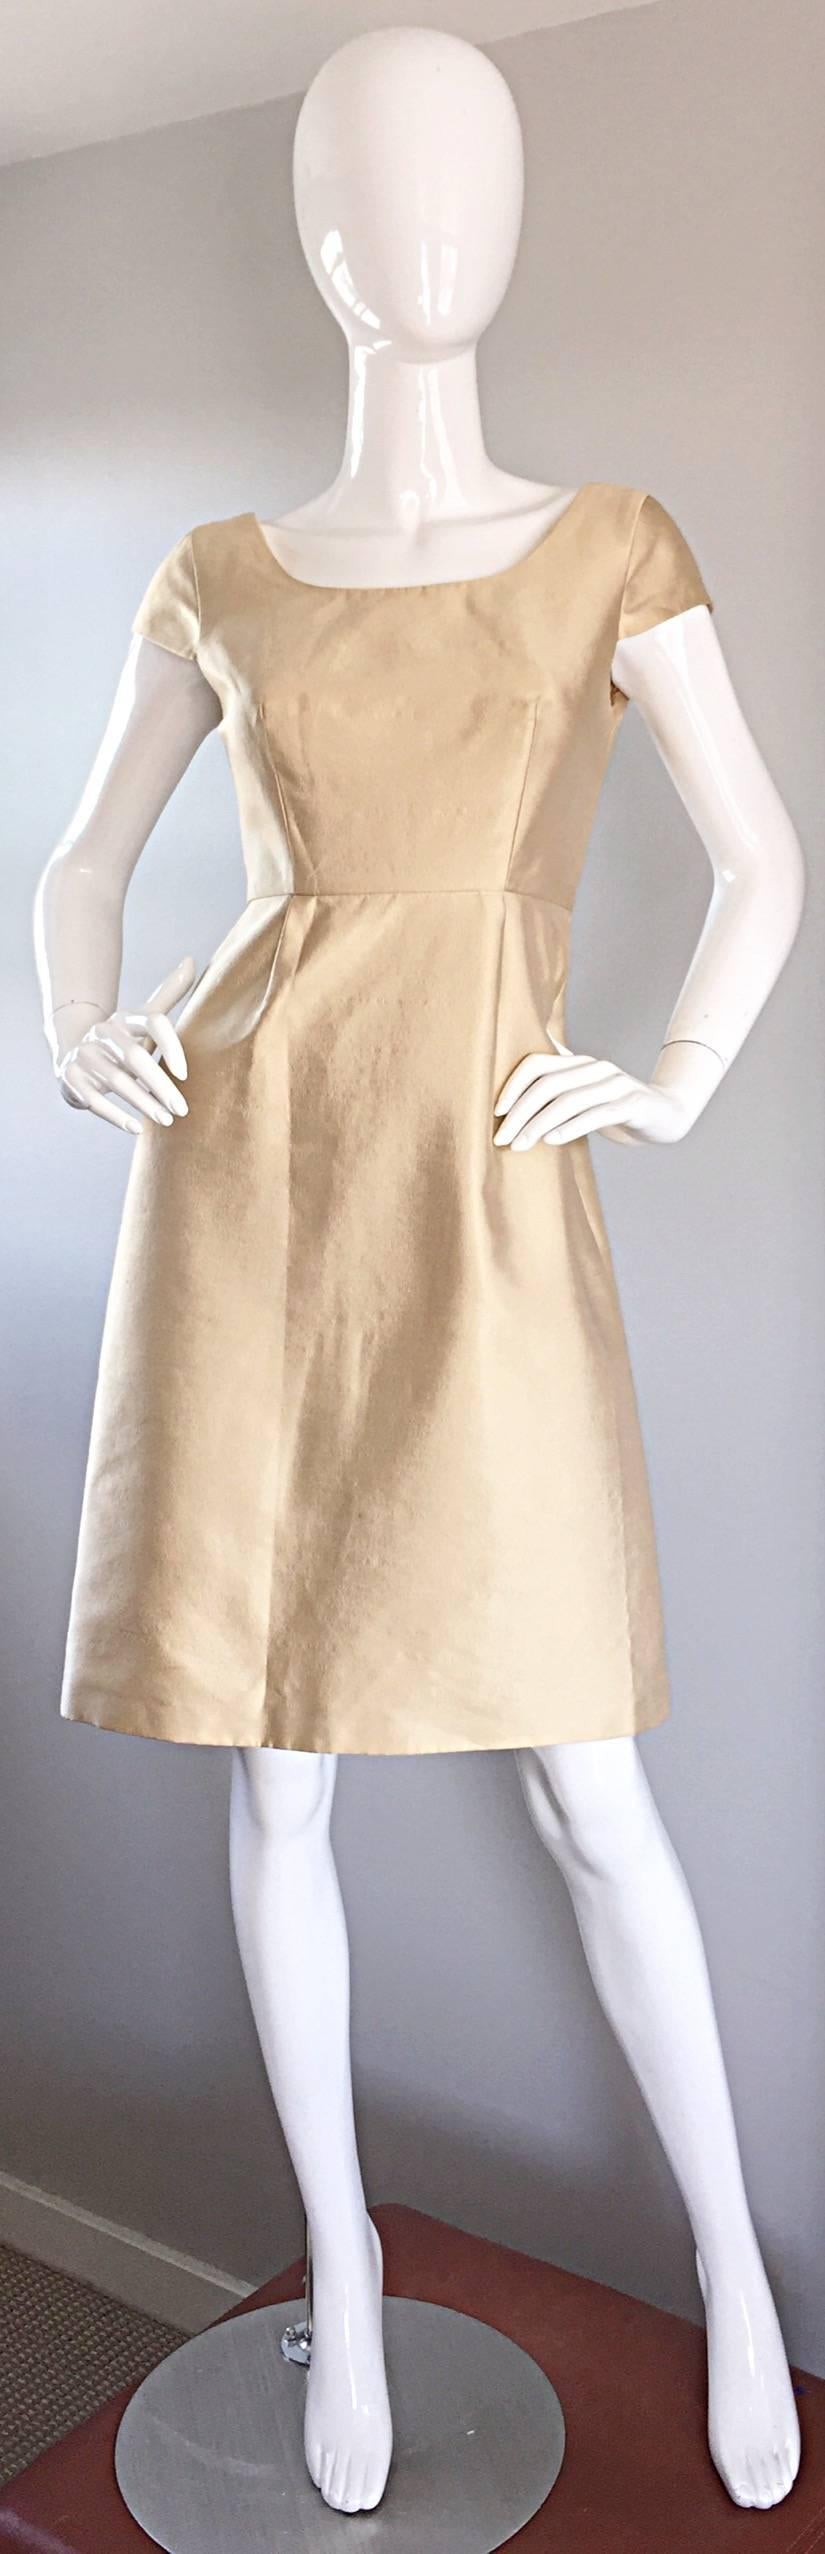 Badgley Mischka Light Gold Fit and Flare 50s Style Flattering Silk Dress In Excellent Condition For Sale In San Diego, CA